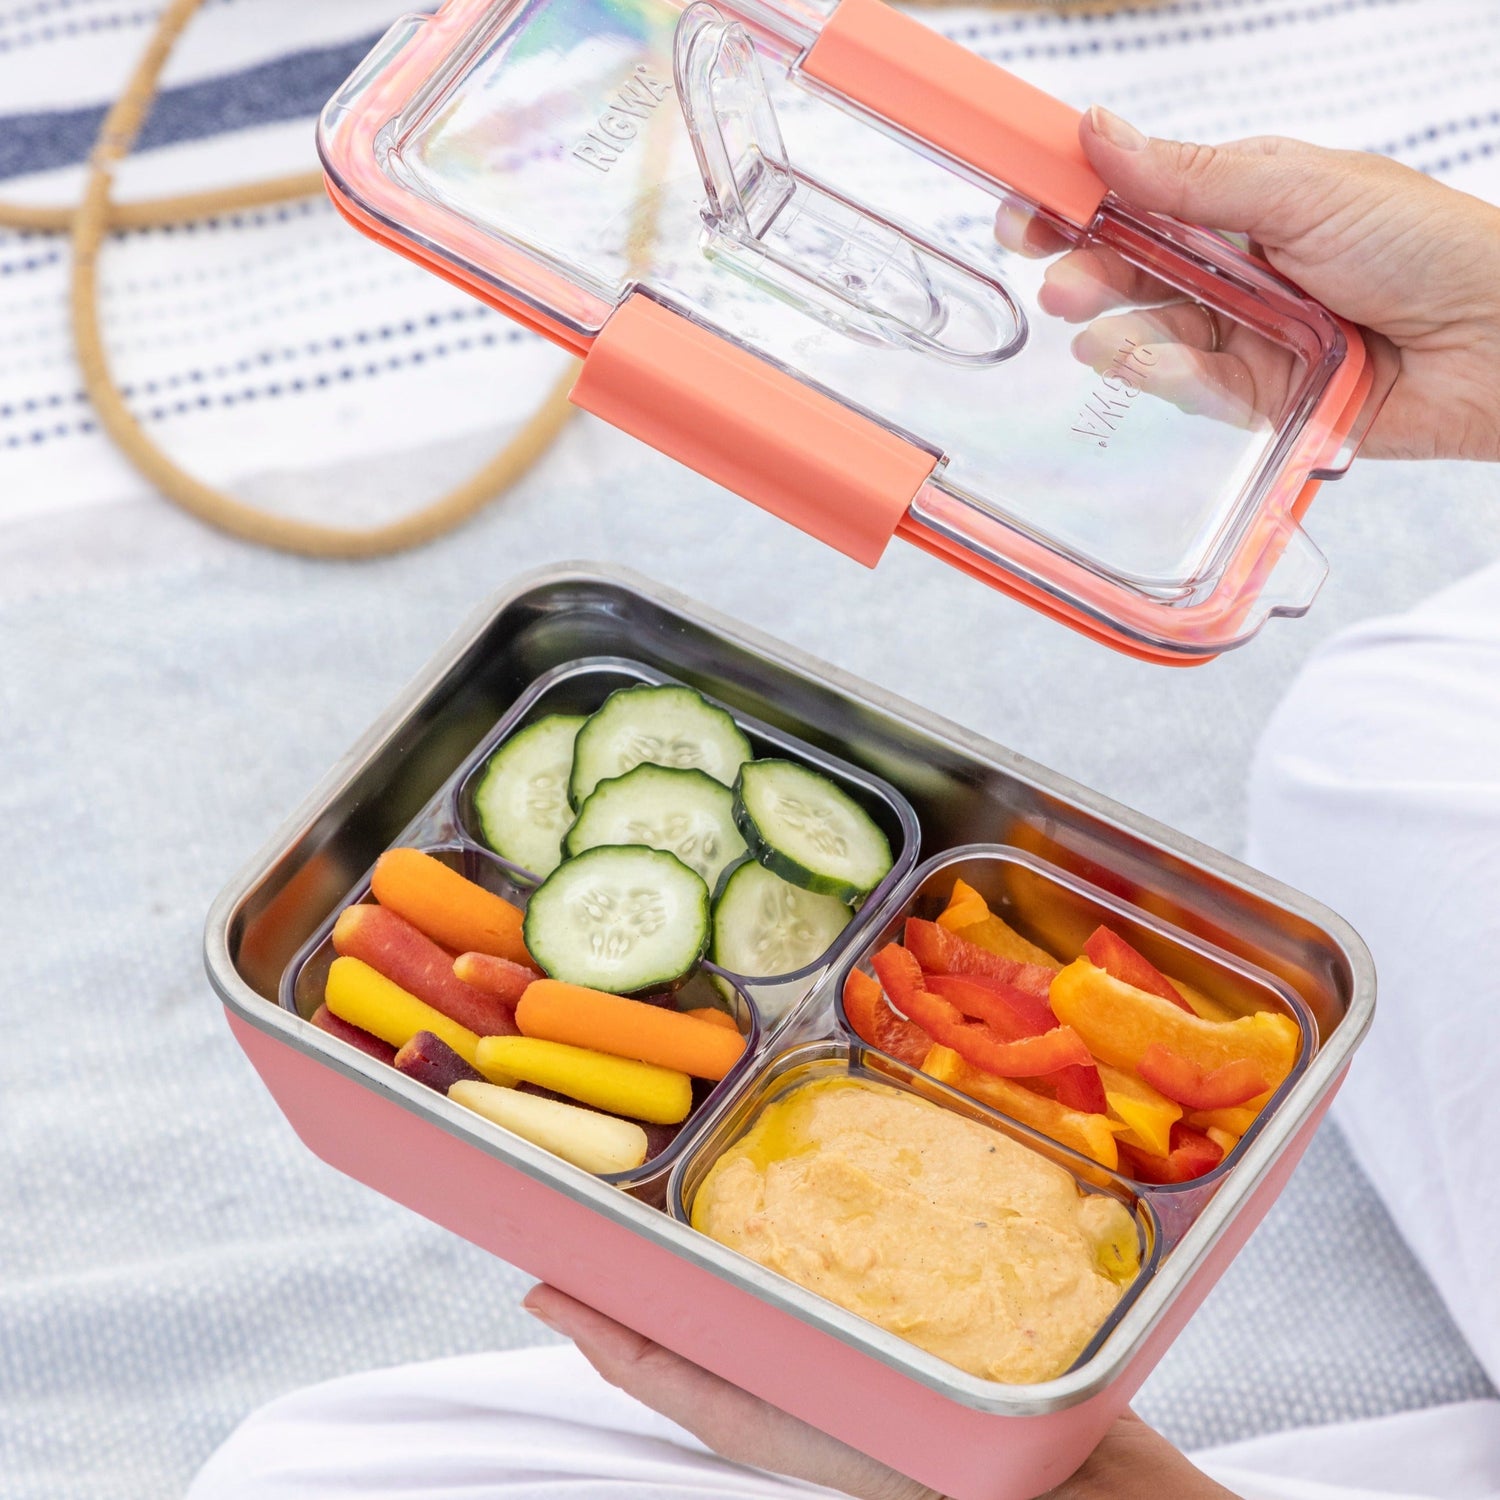 Lunch Box Bento Box Divider With Spoon Baby Food Pouch Storage